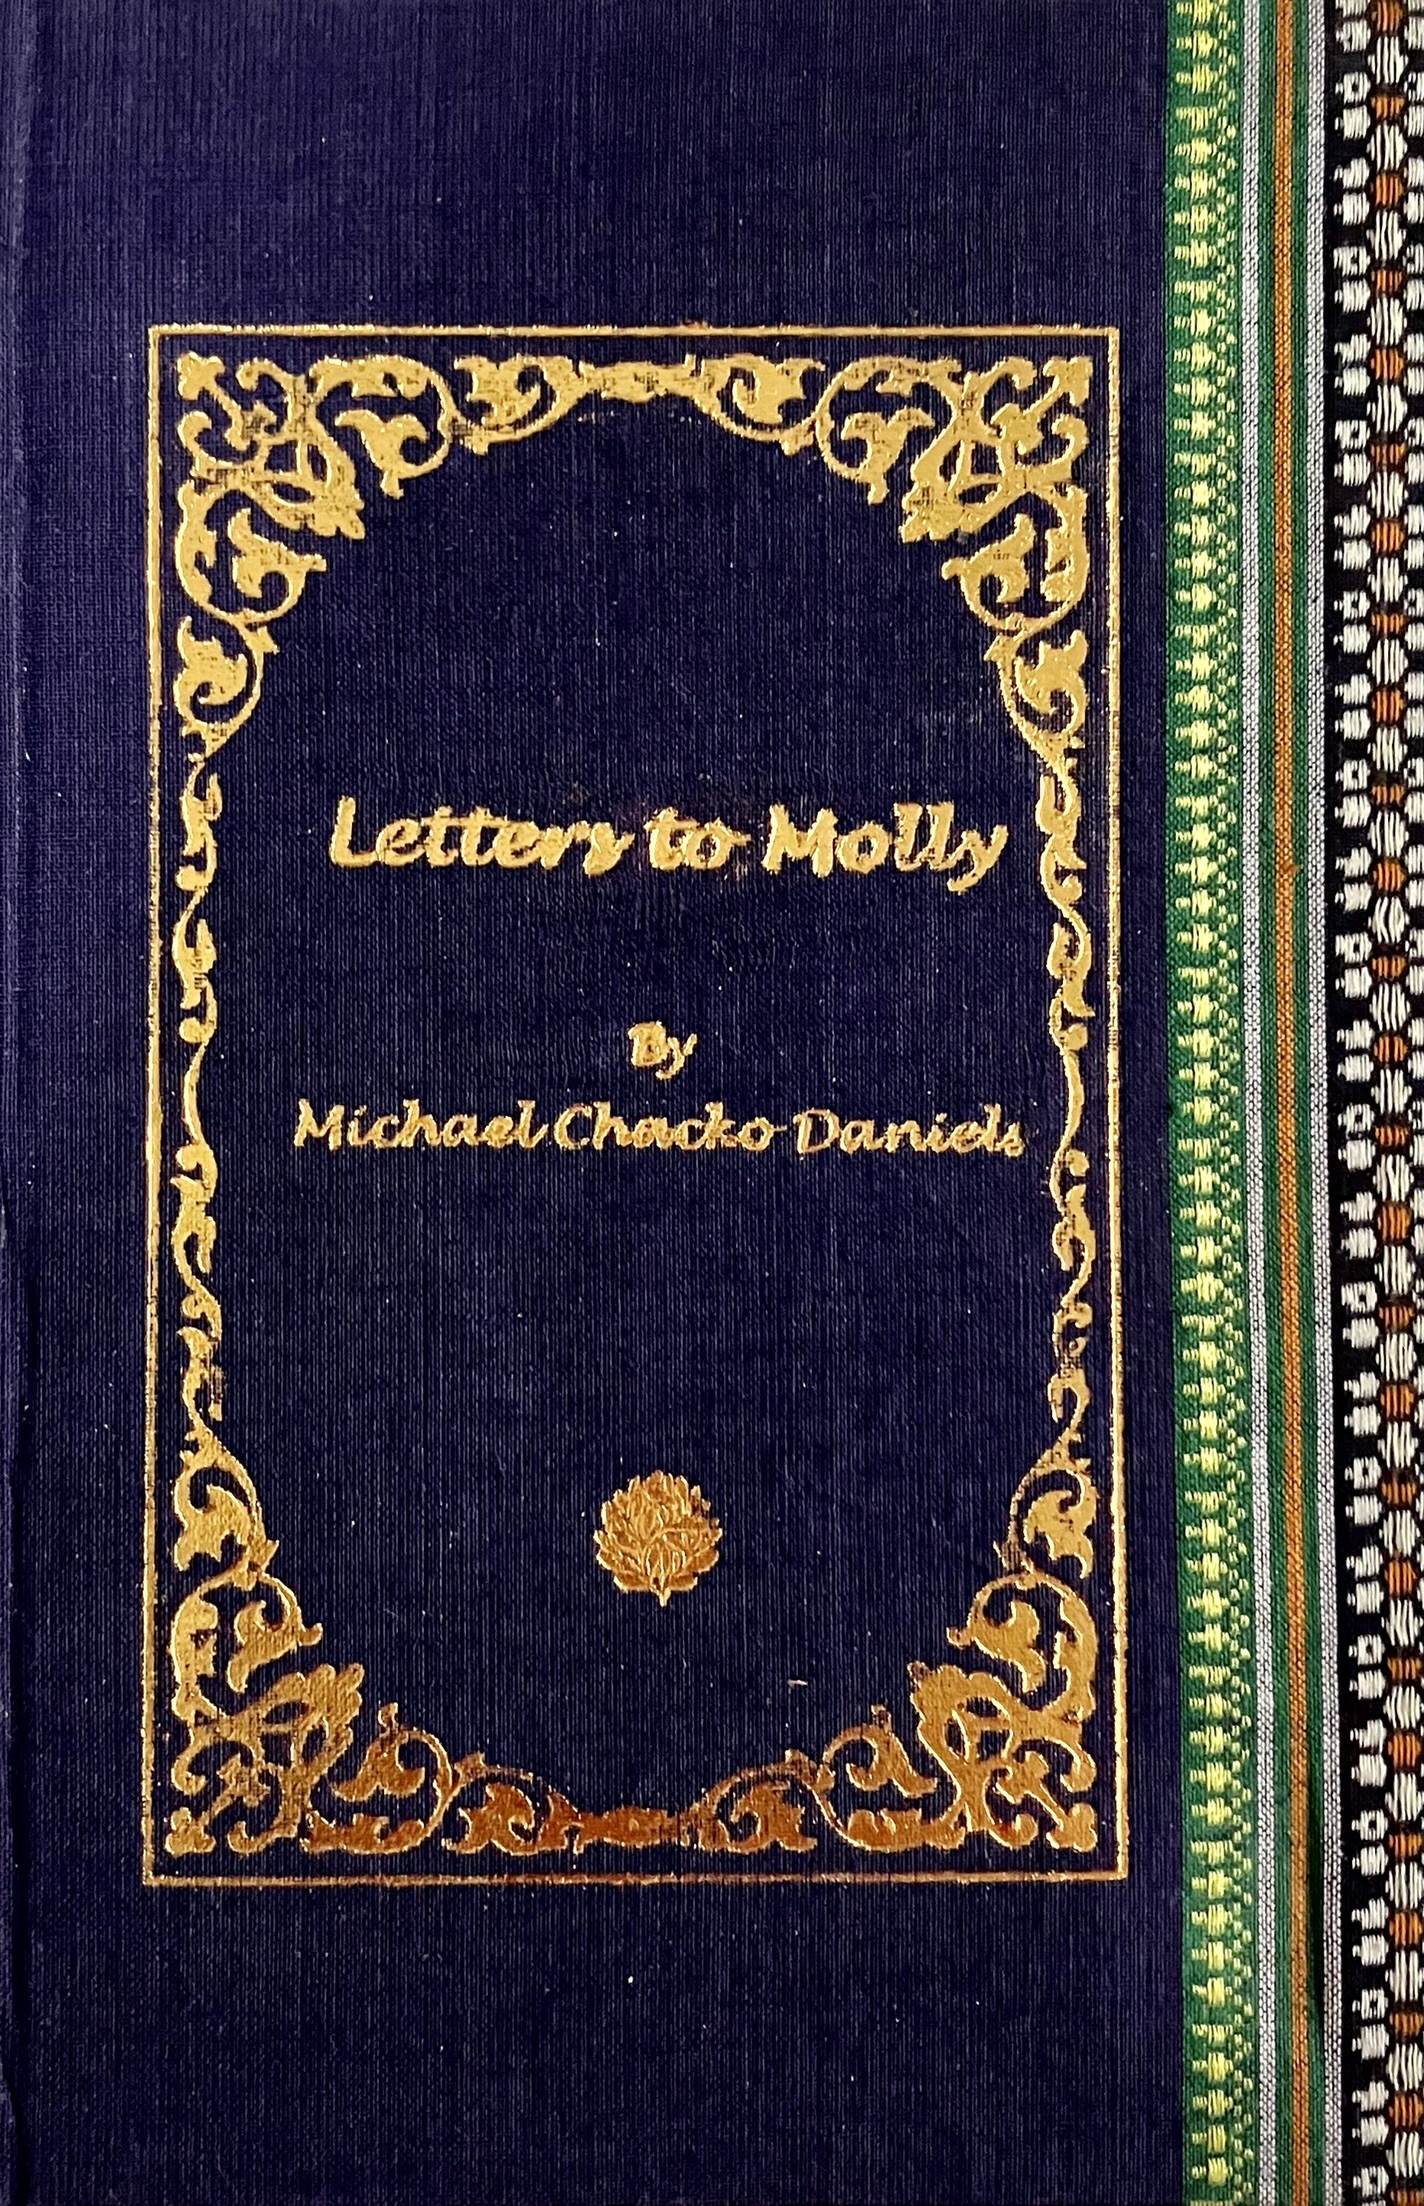 Letters to Molly book cover.